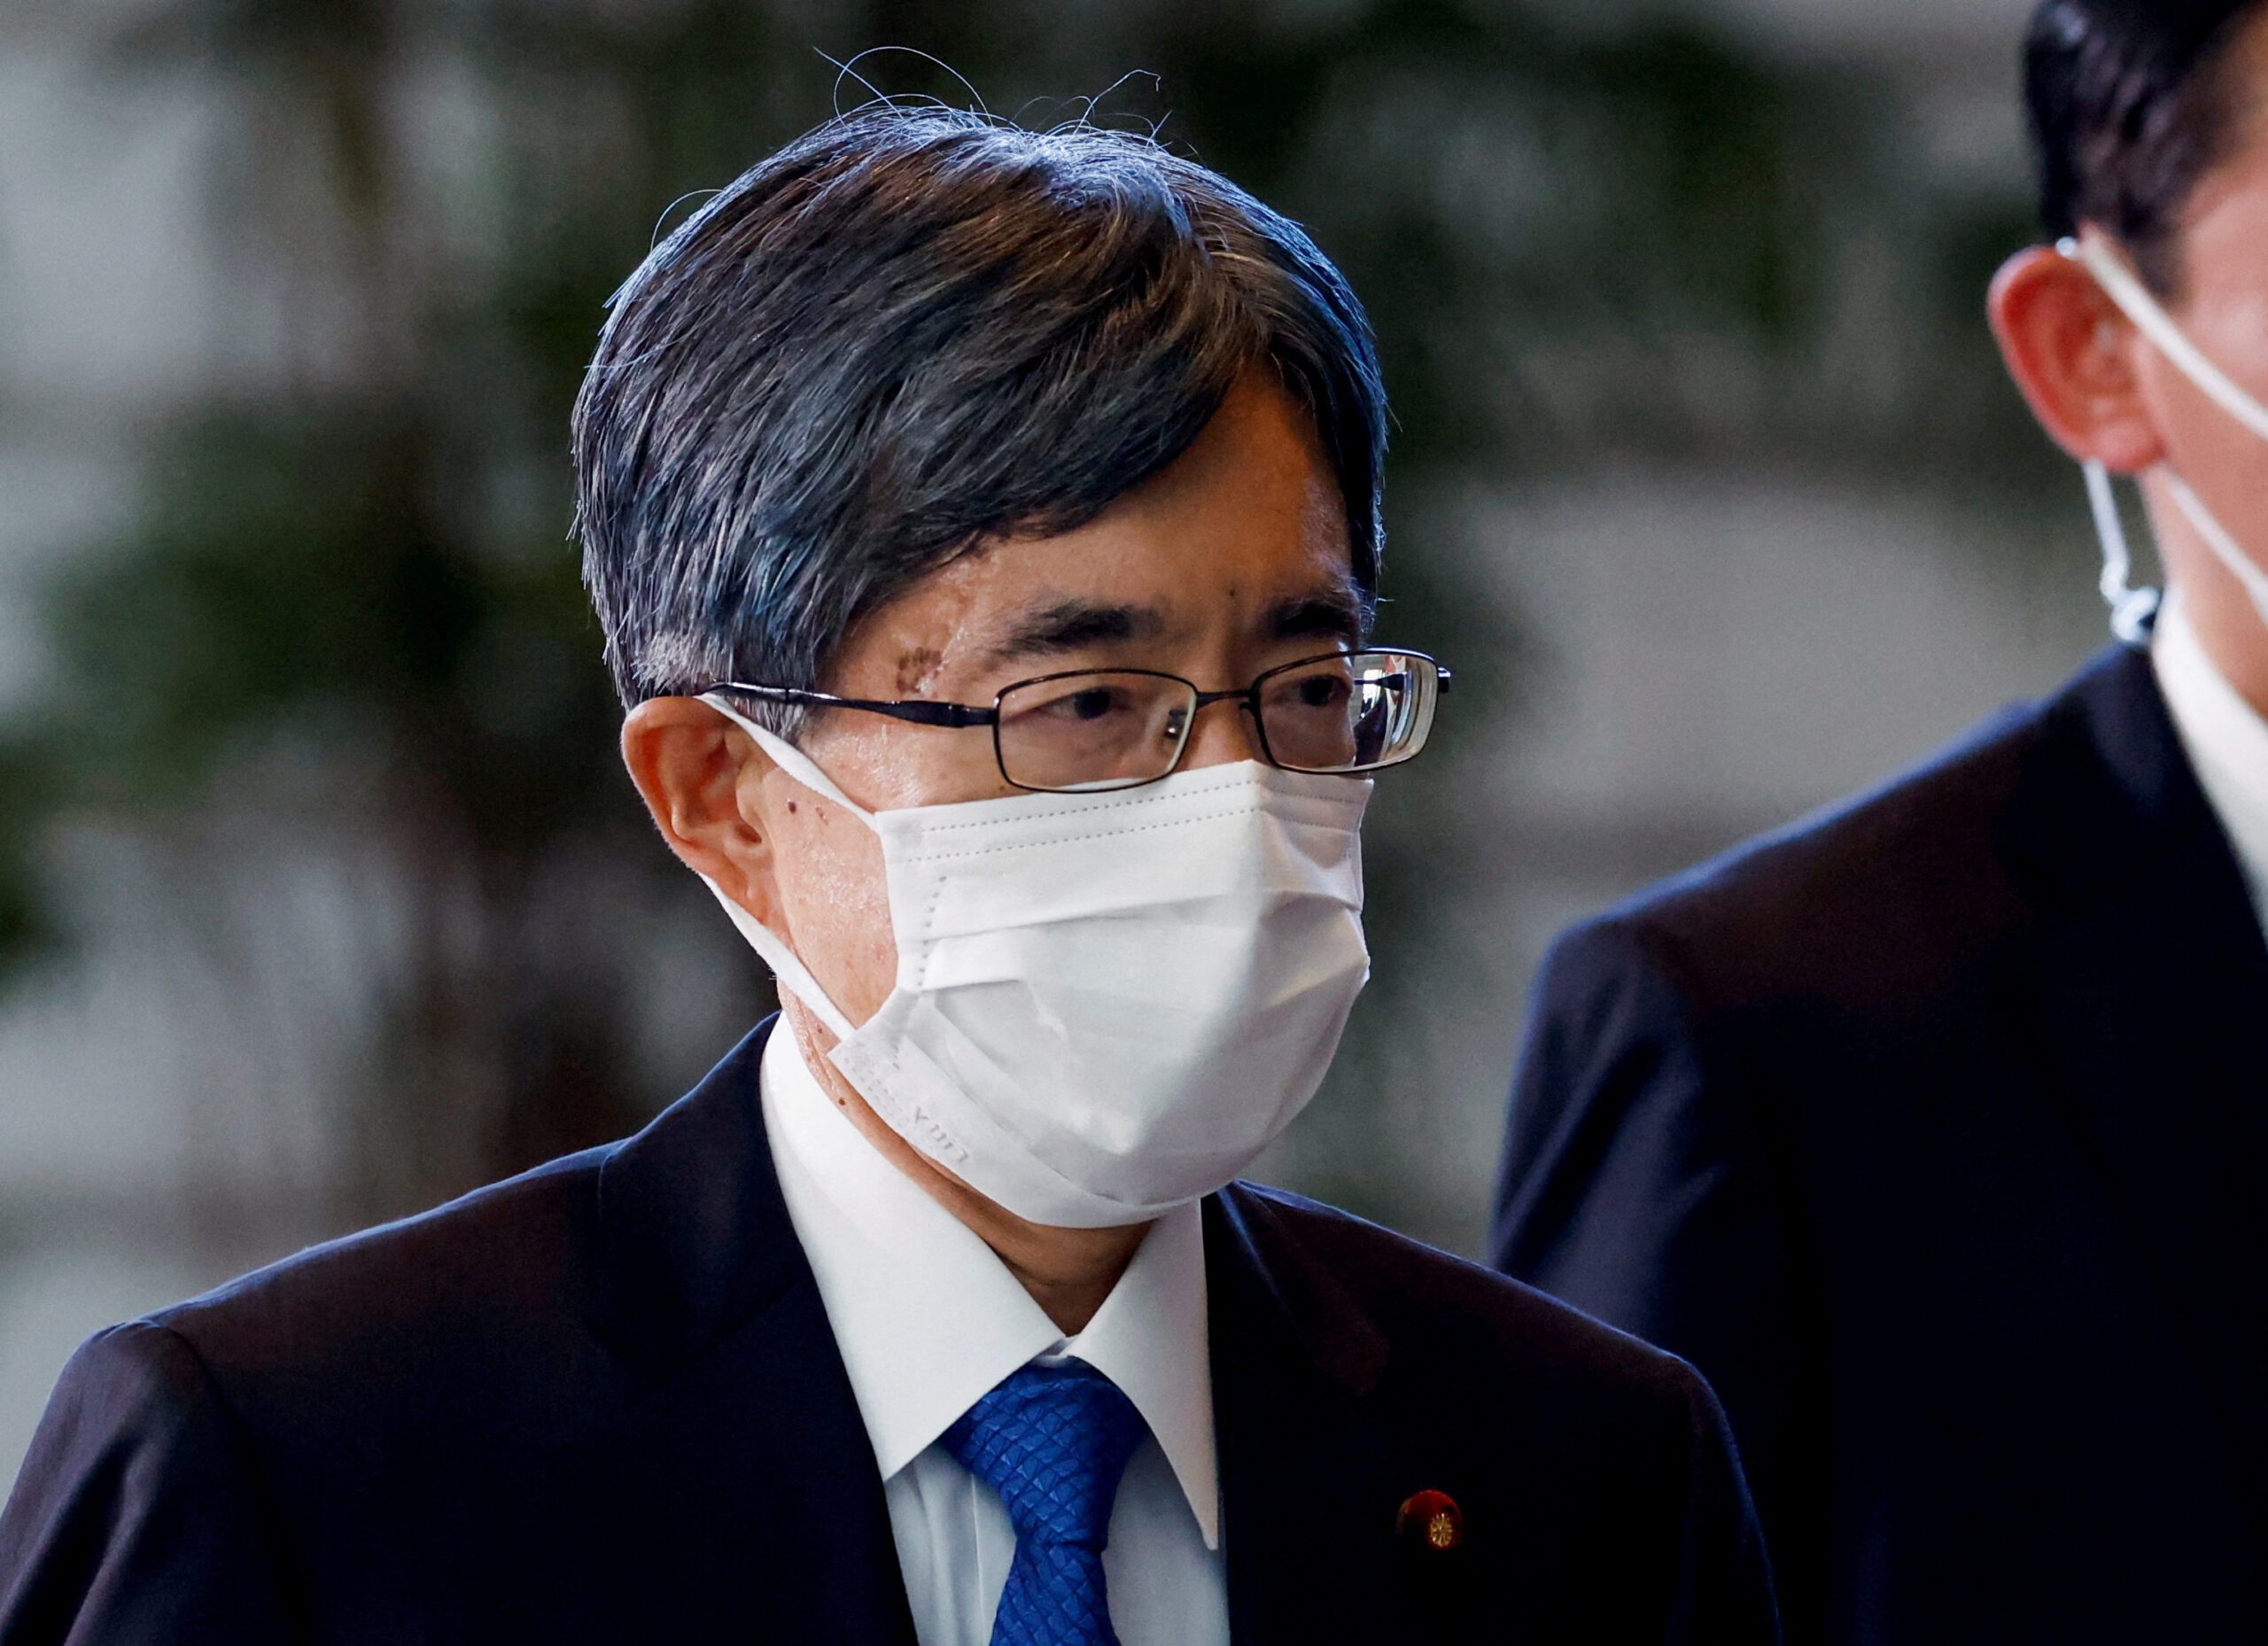 Third Japanese cabinet minister in a month resigns in blow to PM Kishida